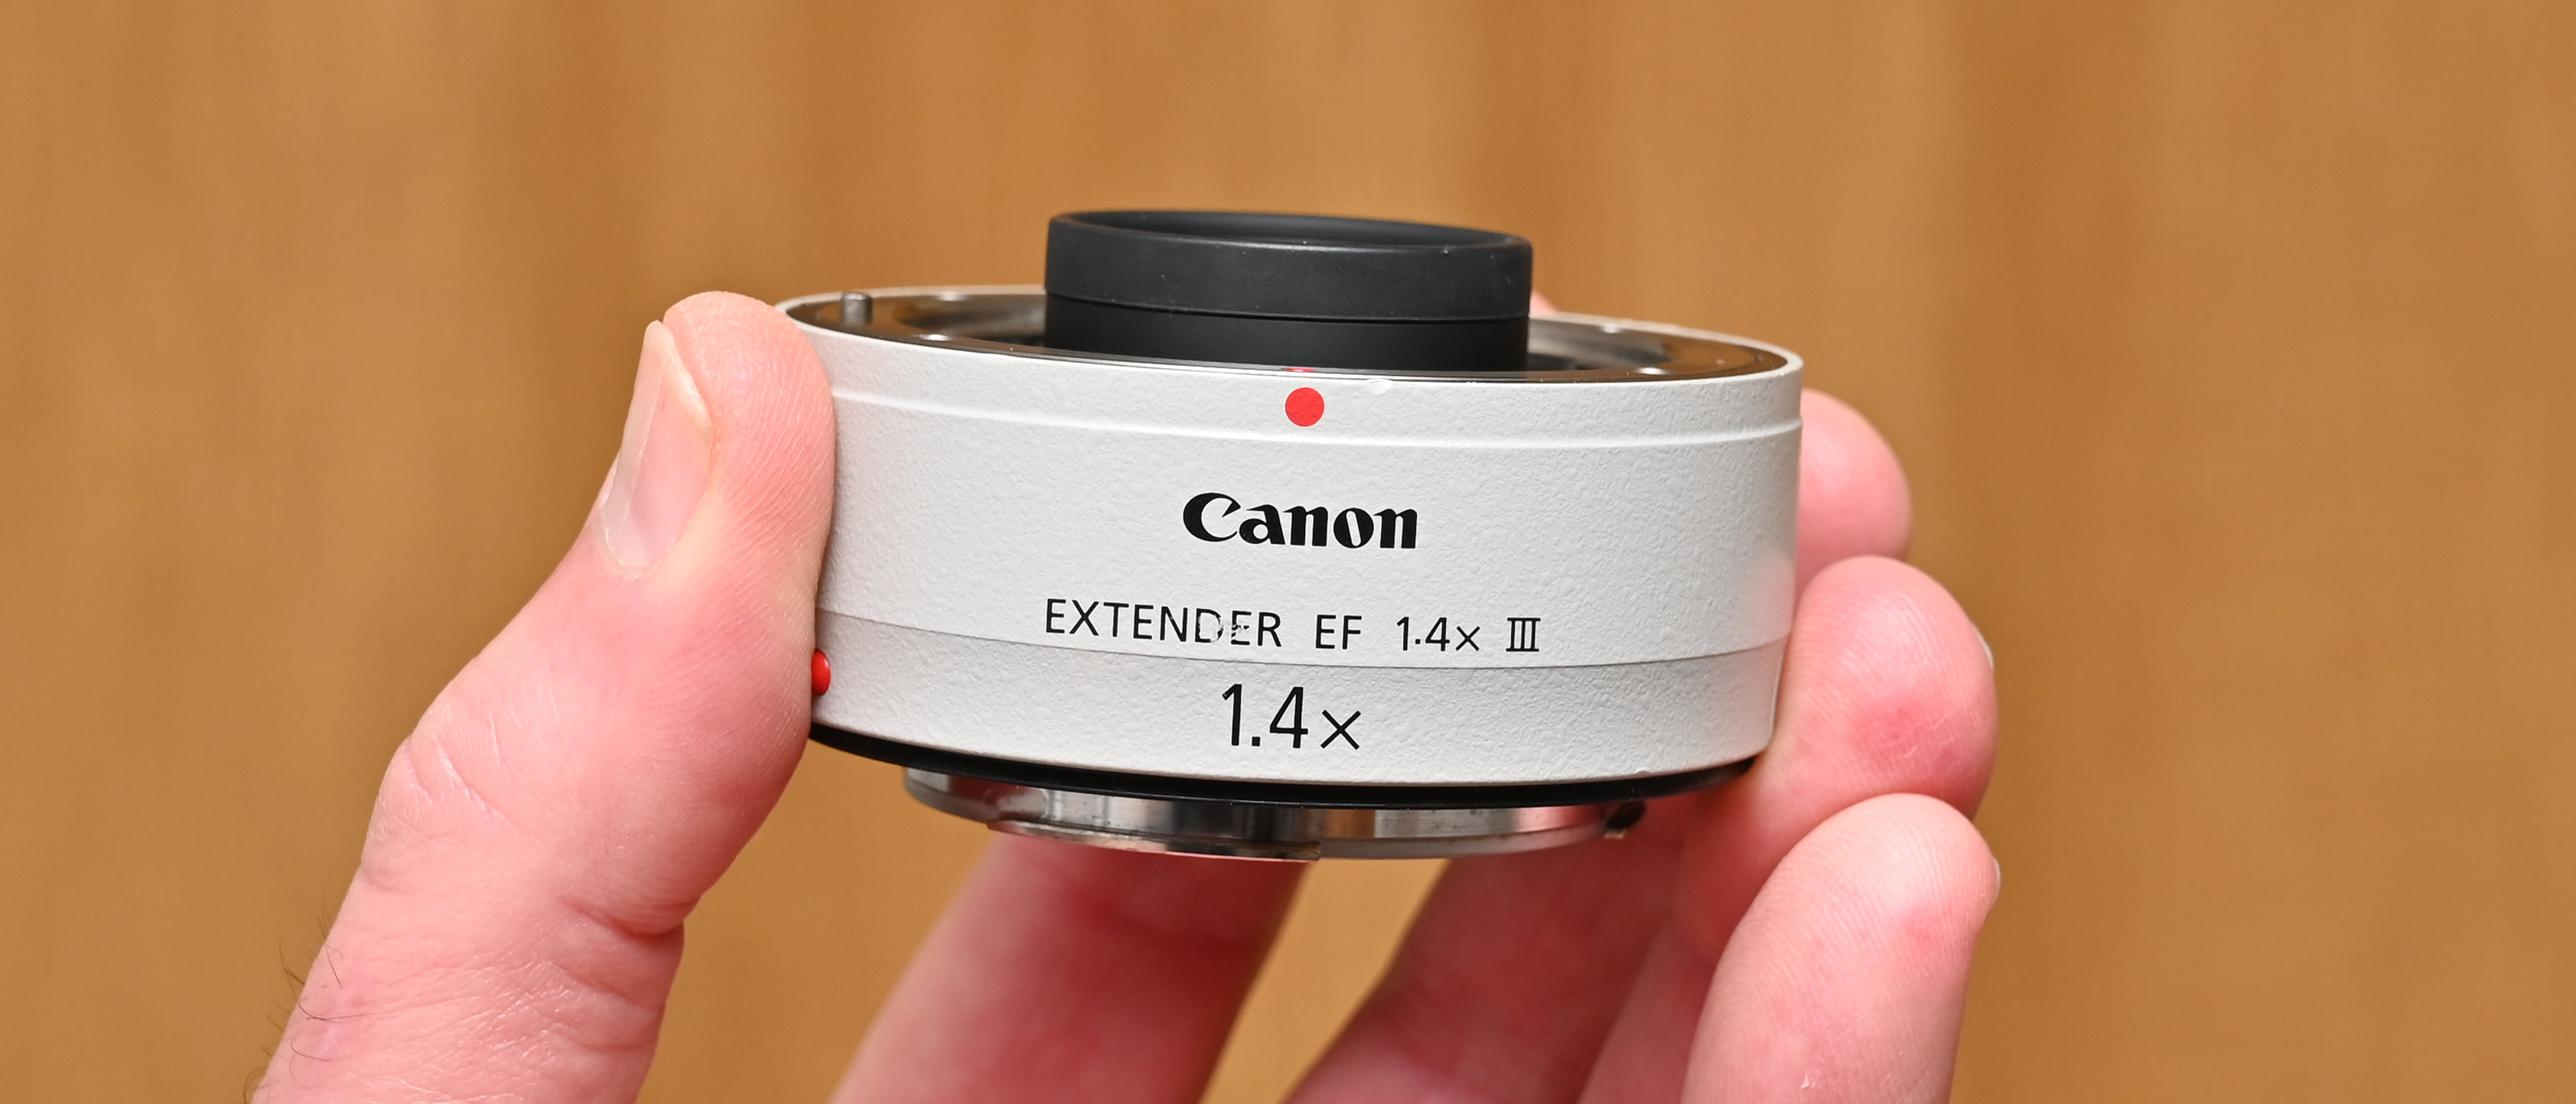 Canon Extender EF 1.4x III review: extend your telephoto reach 